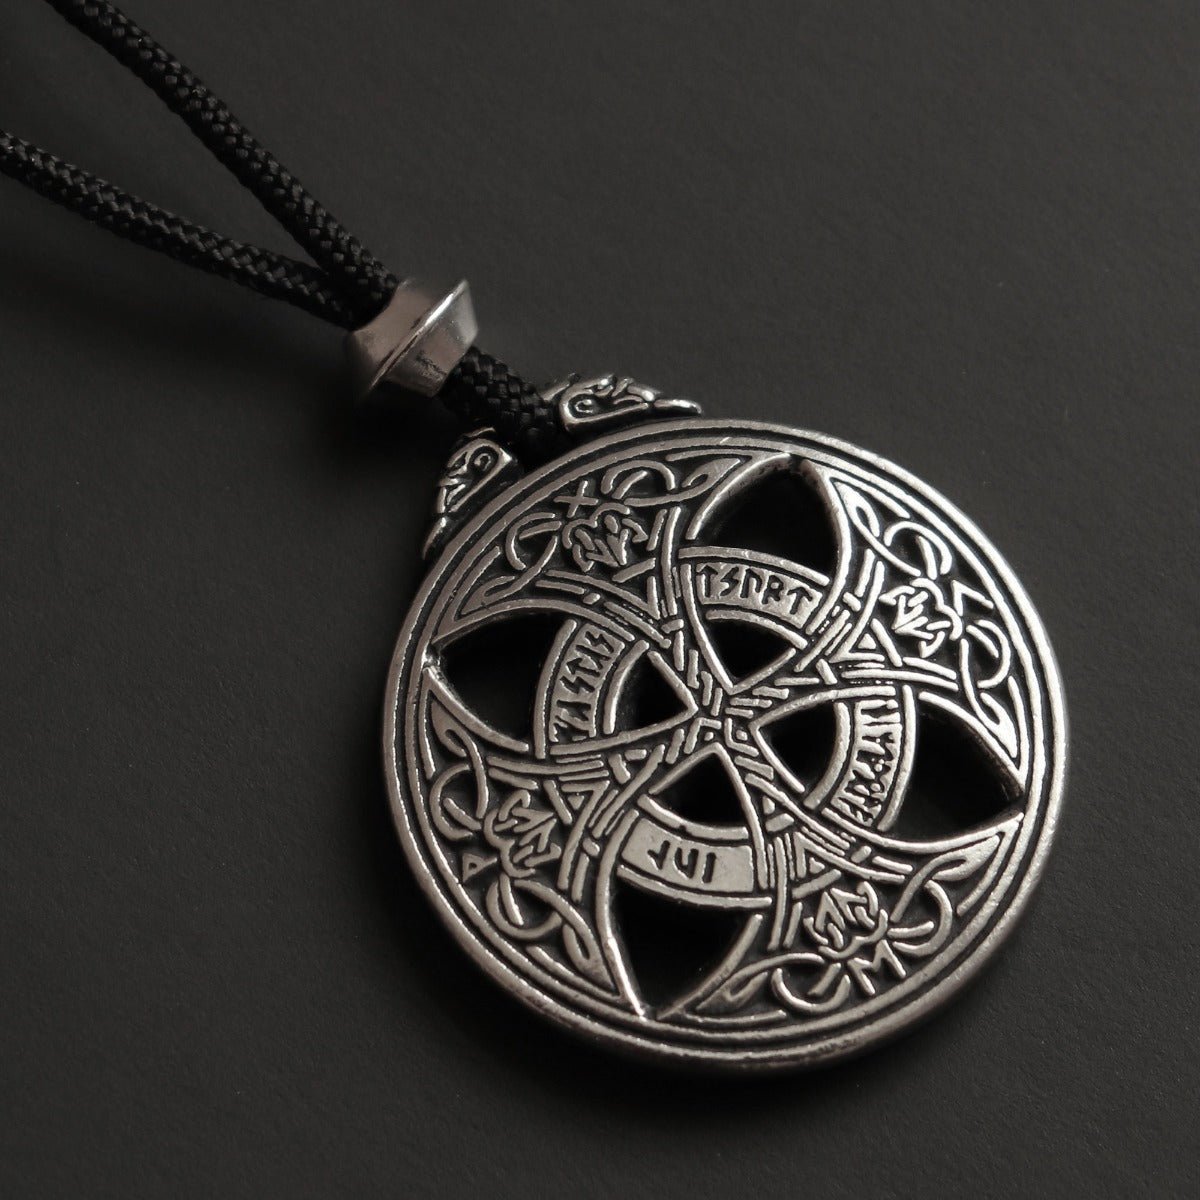 The Runic Love Amulet